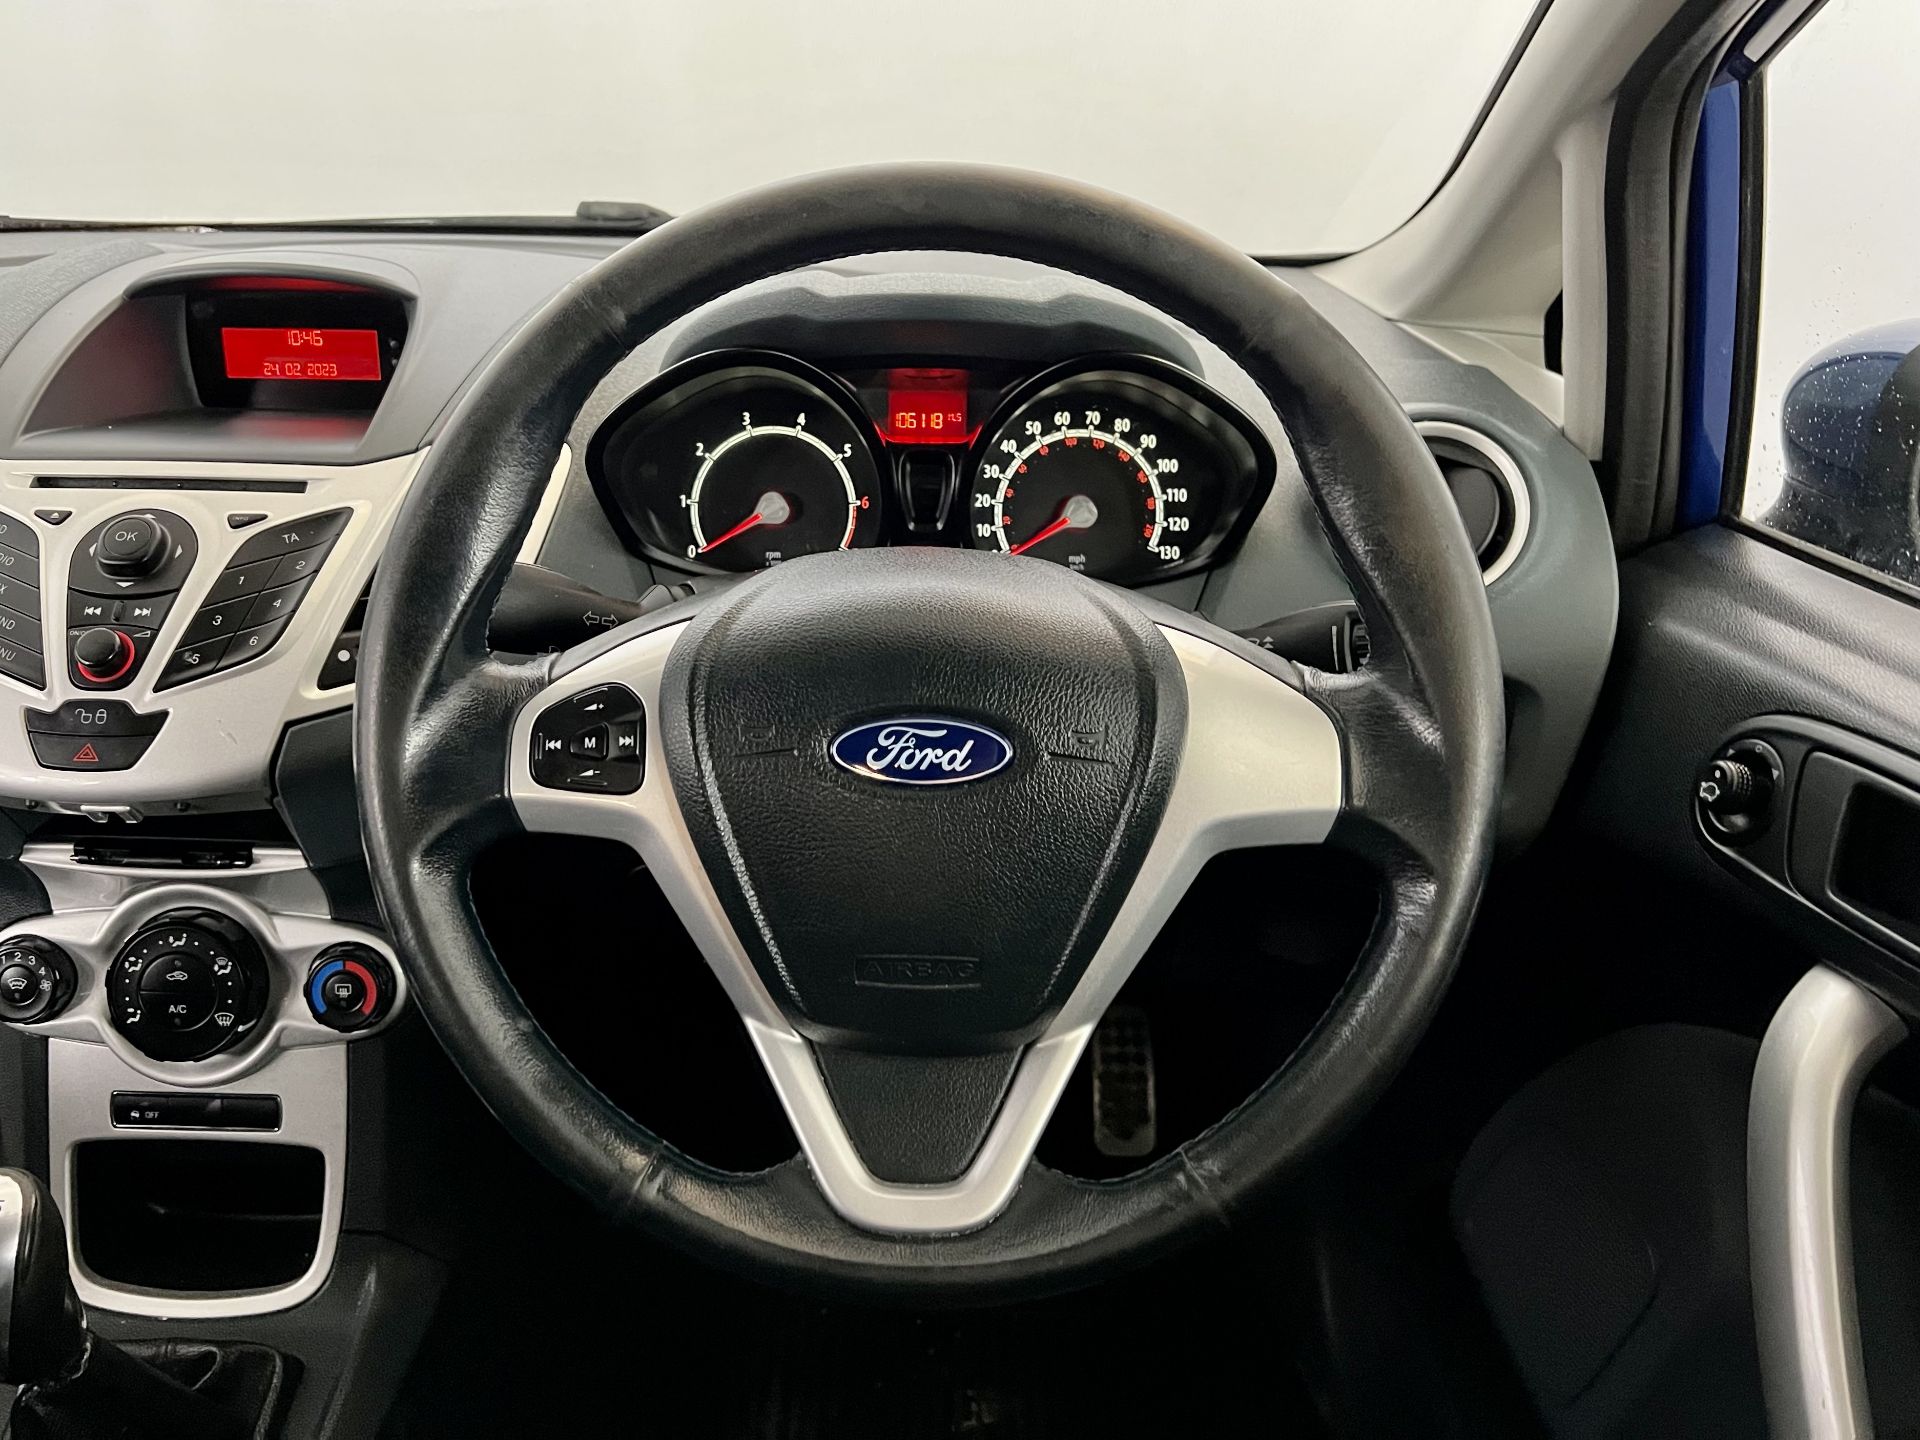 Ford Fiesta S1600 - Image 26 of 30